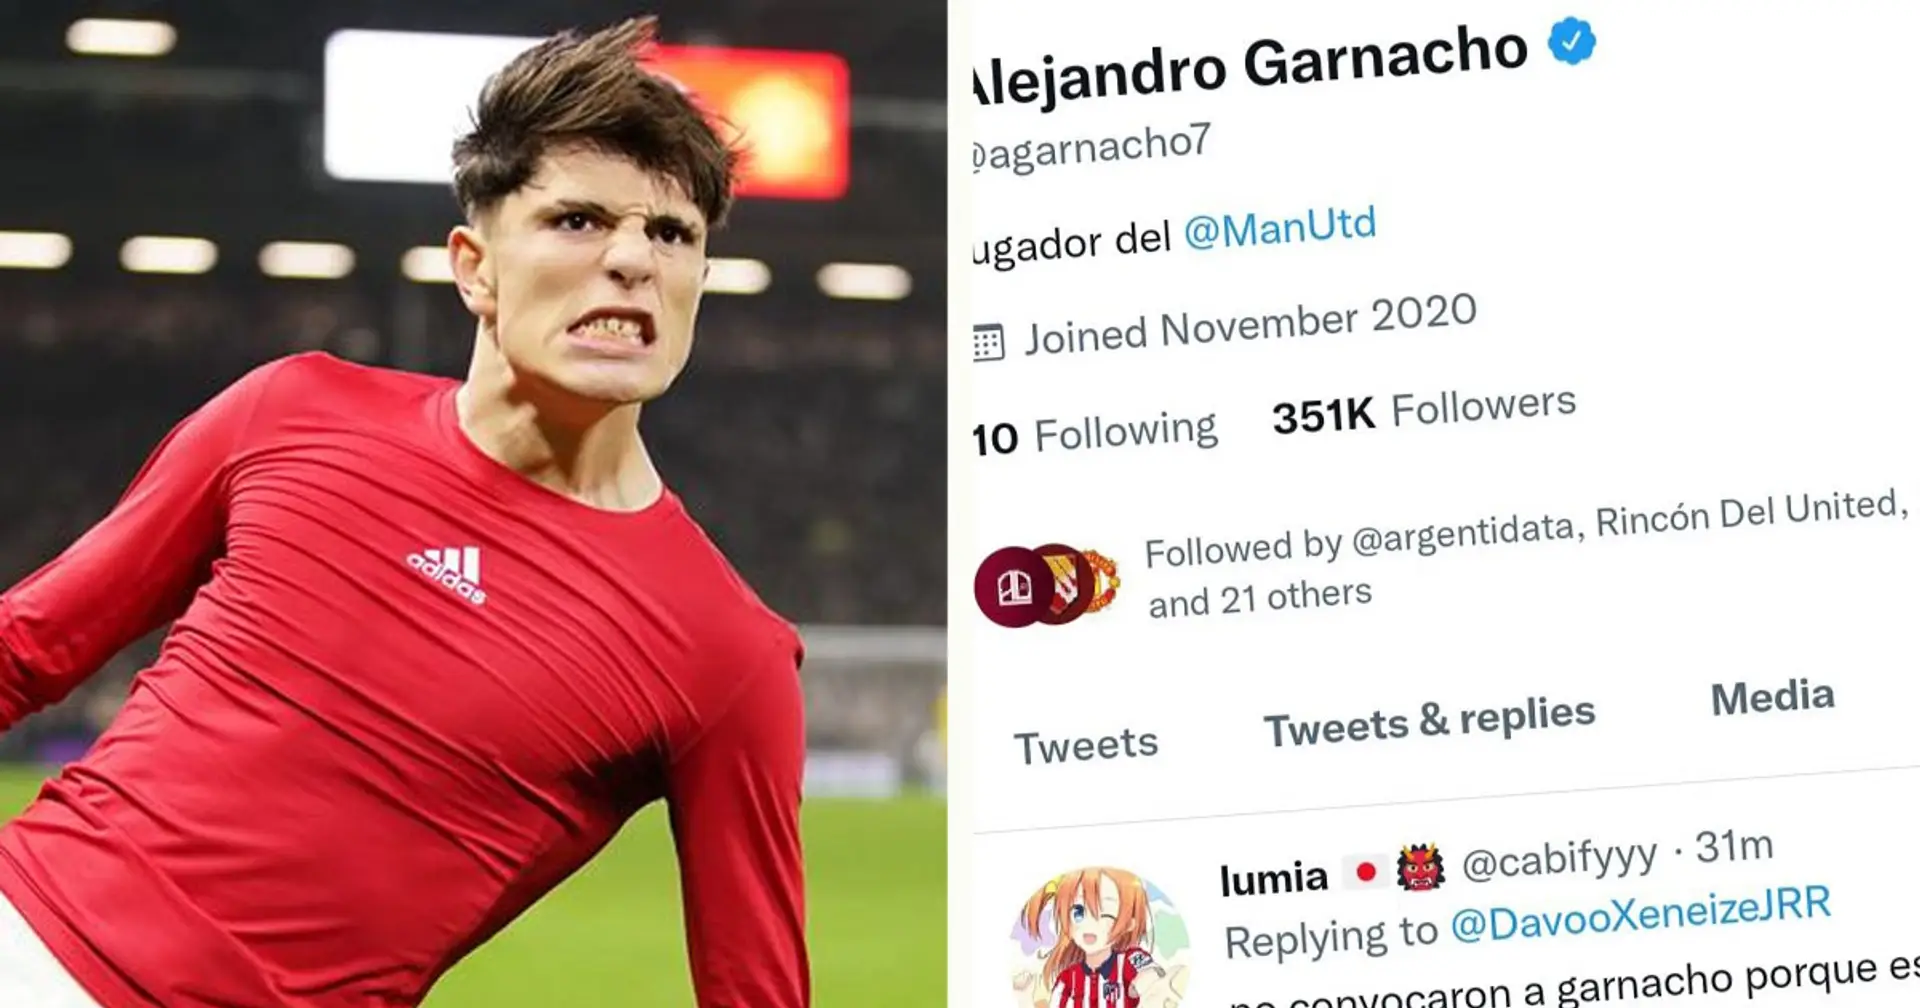 Garnacho reacts to missing out on Argentina World Cup spot – likes interesting tweet